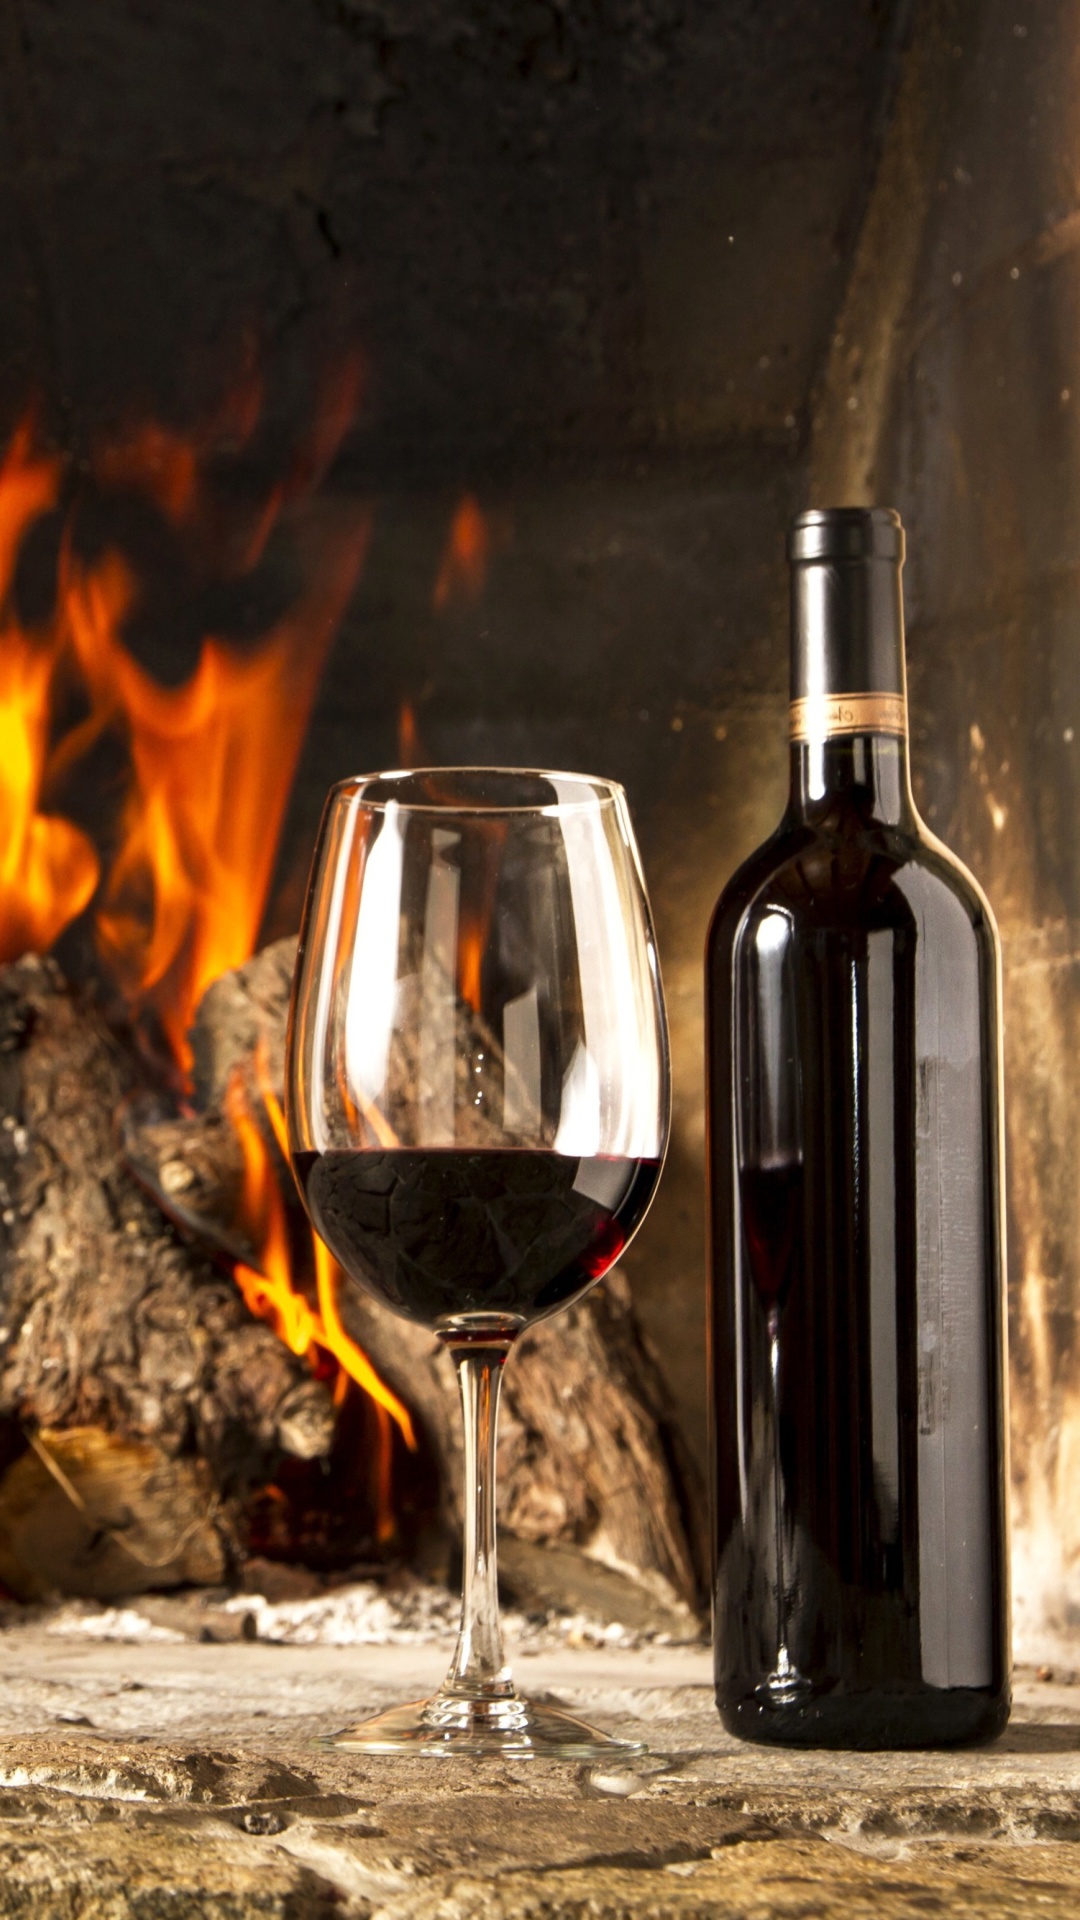 Wine and fireplace wallpaper 1080x1920